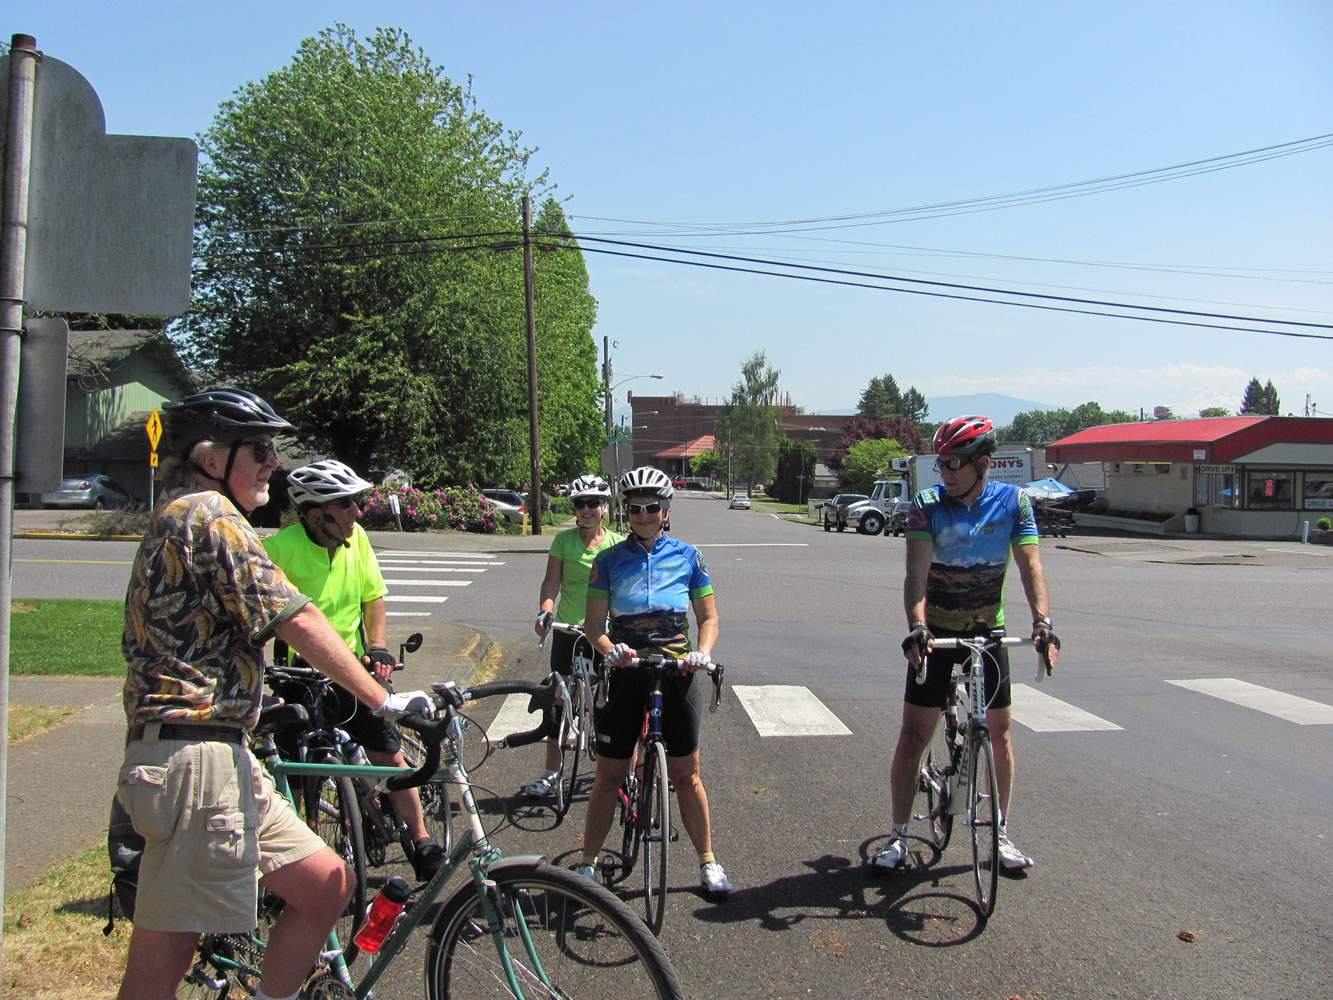 Cyclists stop near a historical house, one of the points of interest during Joseph Blanco's history rides in Camas.